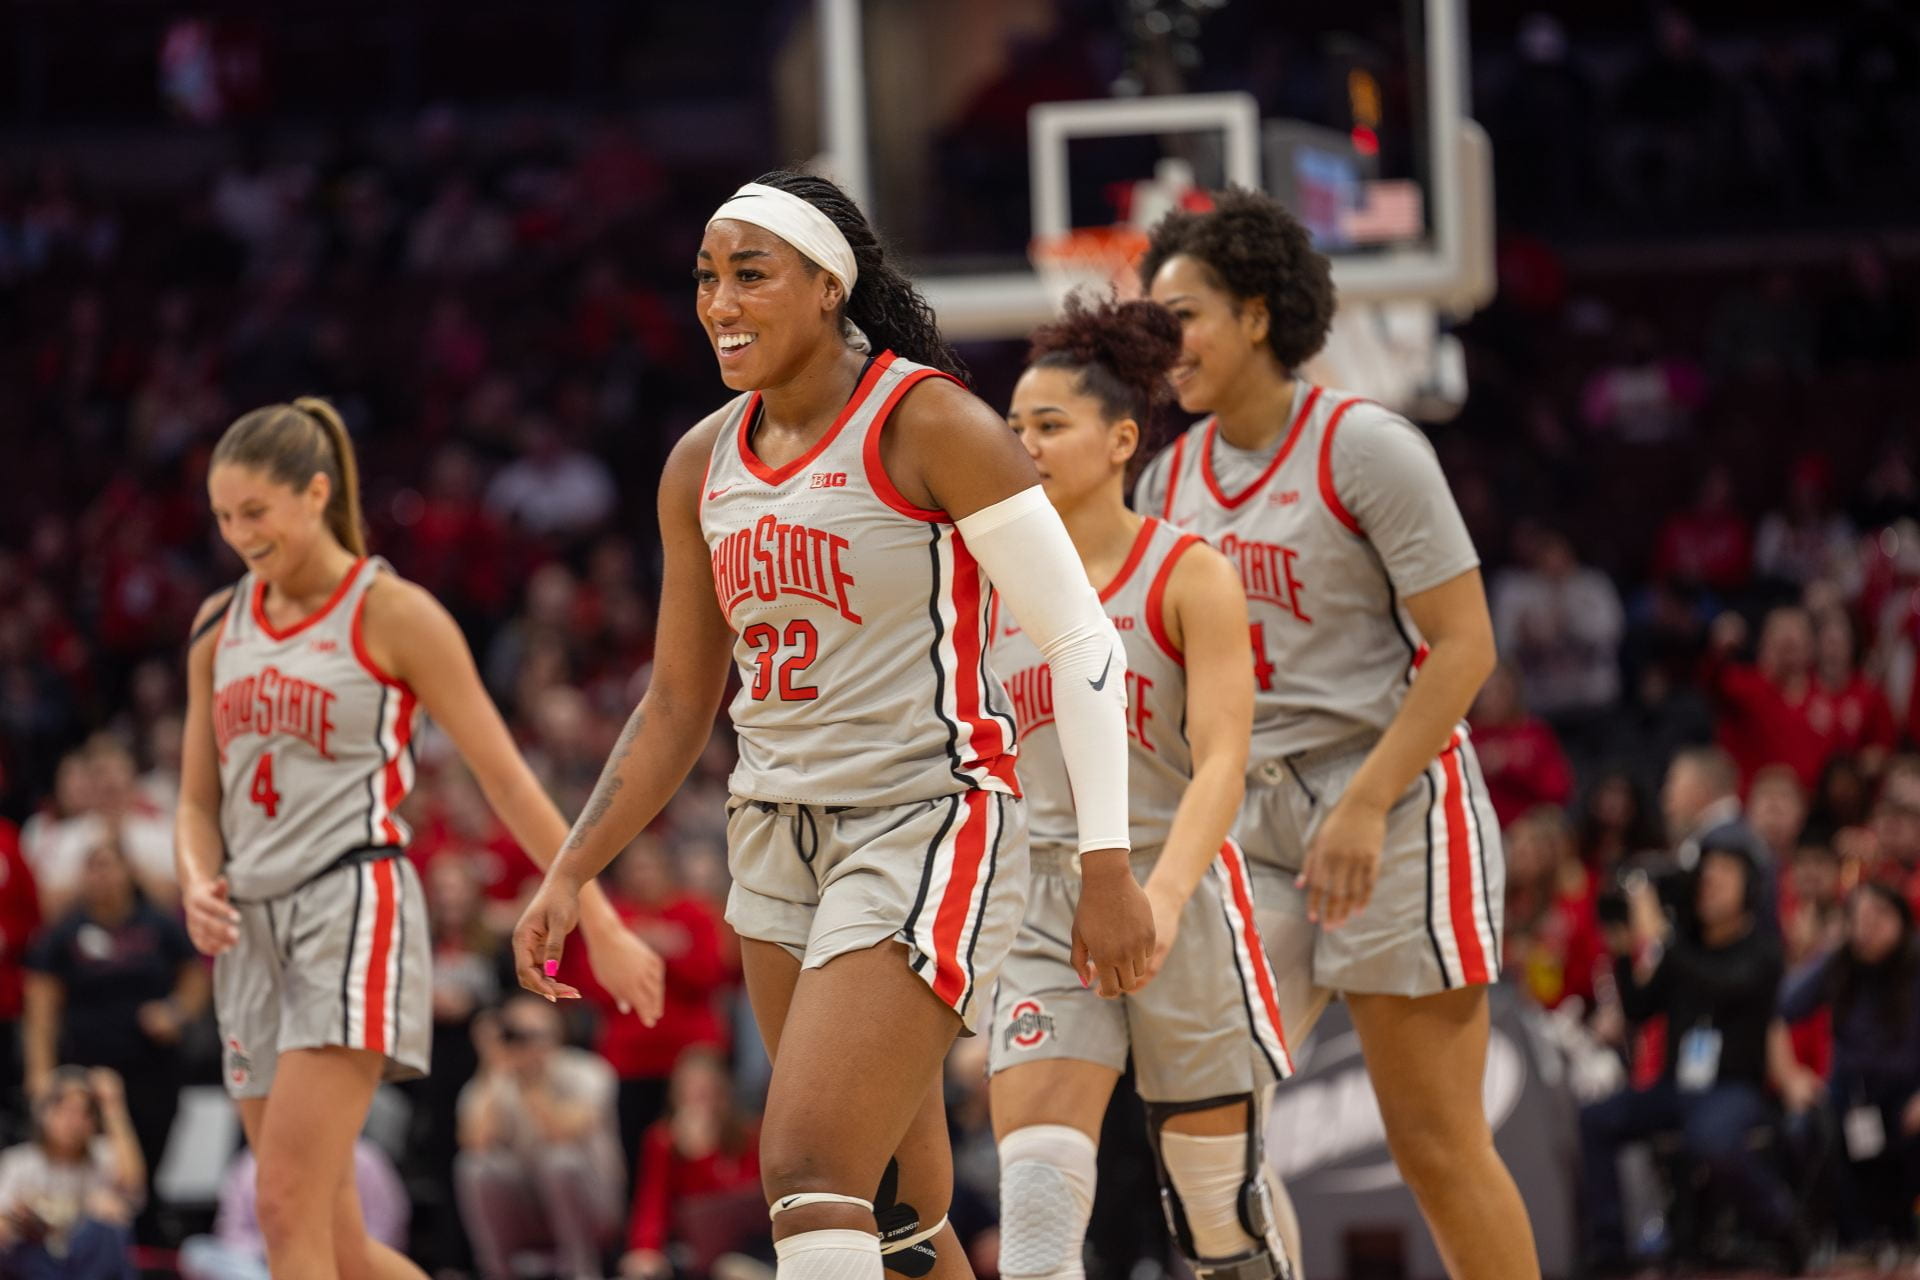 Women’s Basketball: Ohio State selected as No. 2 seed, will host No. 15 seed Maine in first round of NCAA Tournament